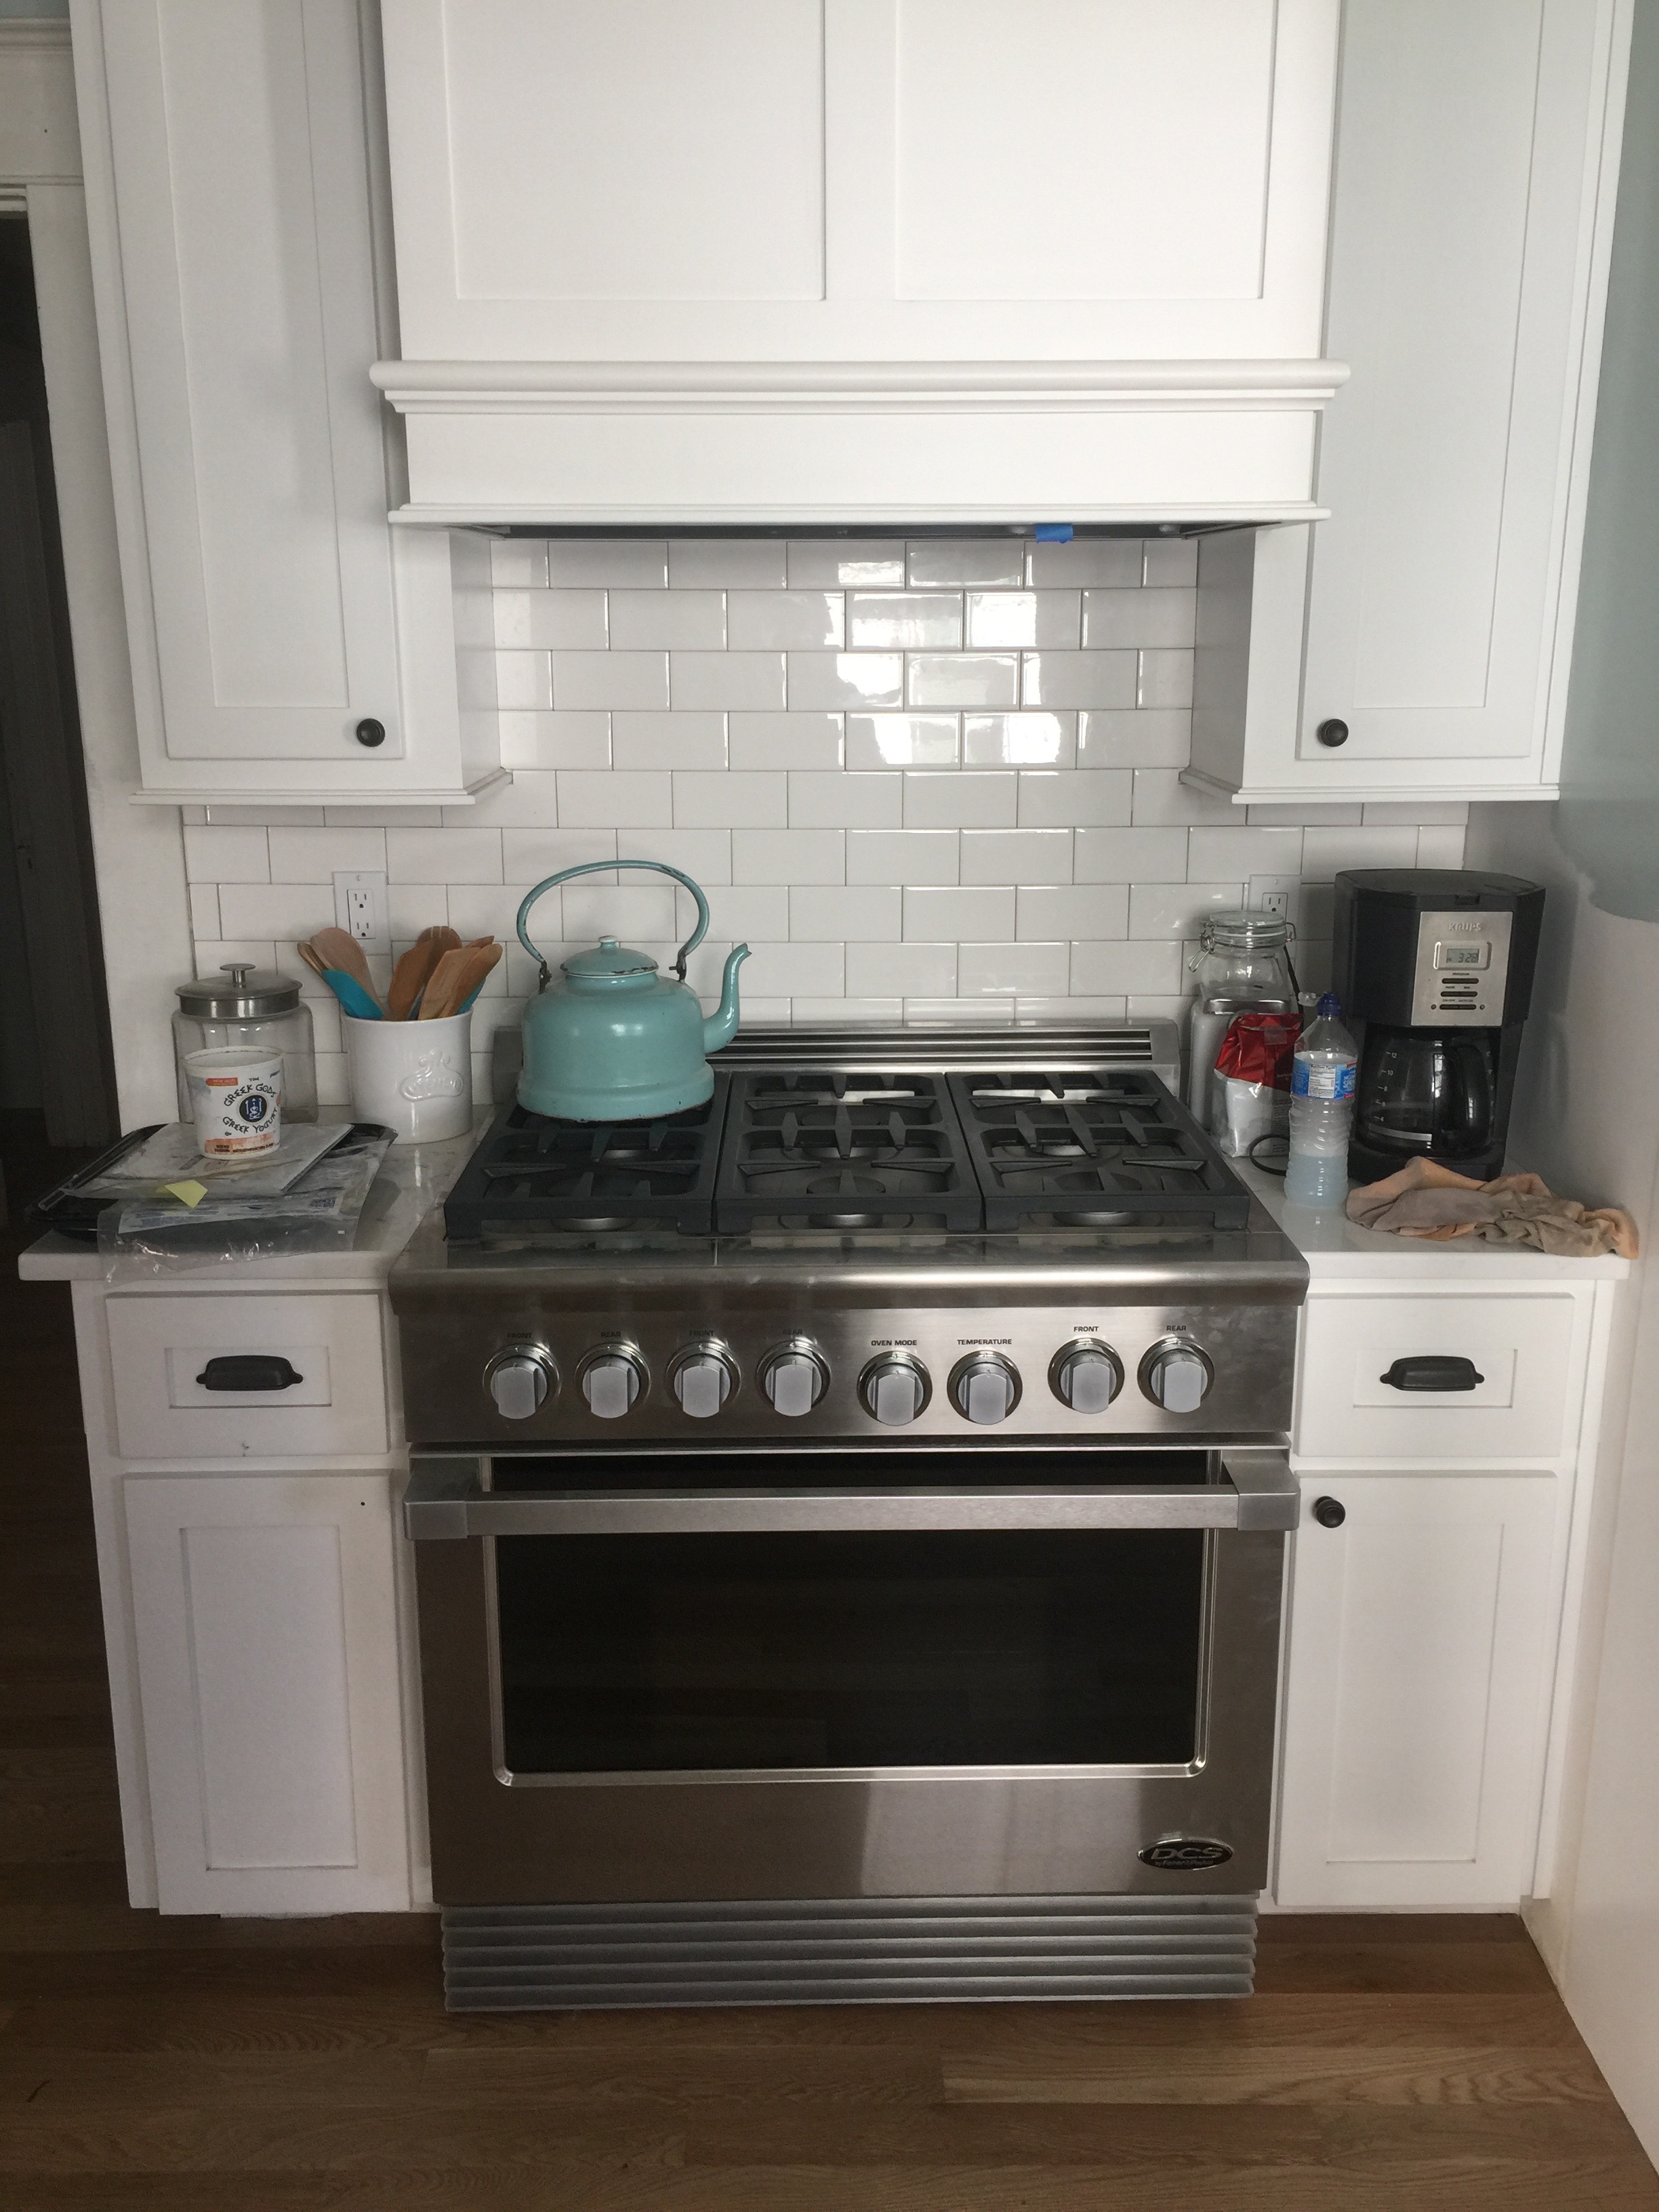 New Stove, Cabinets, Tile